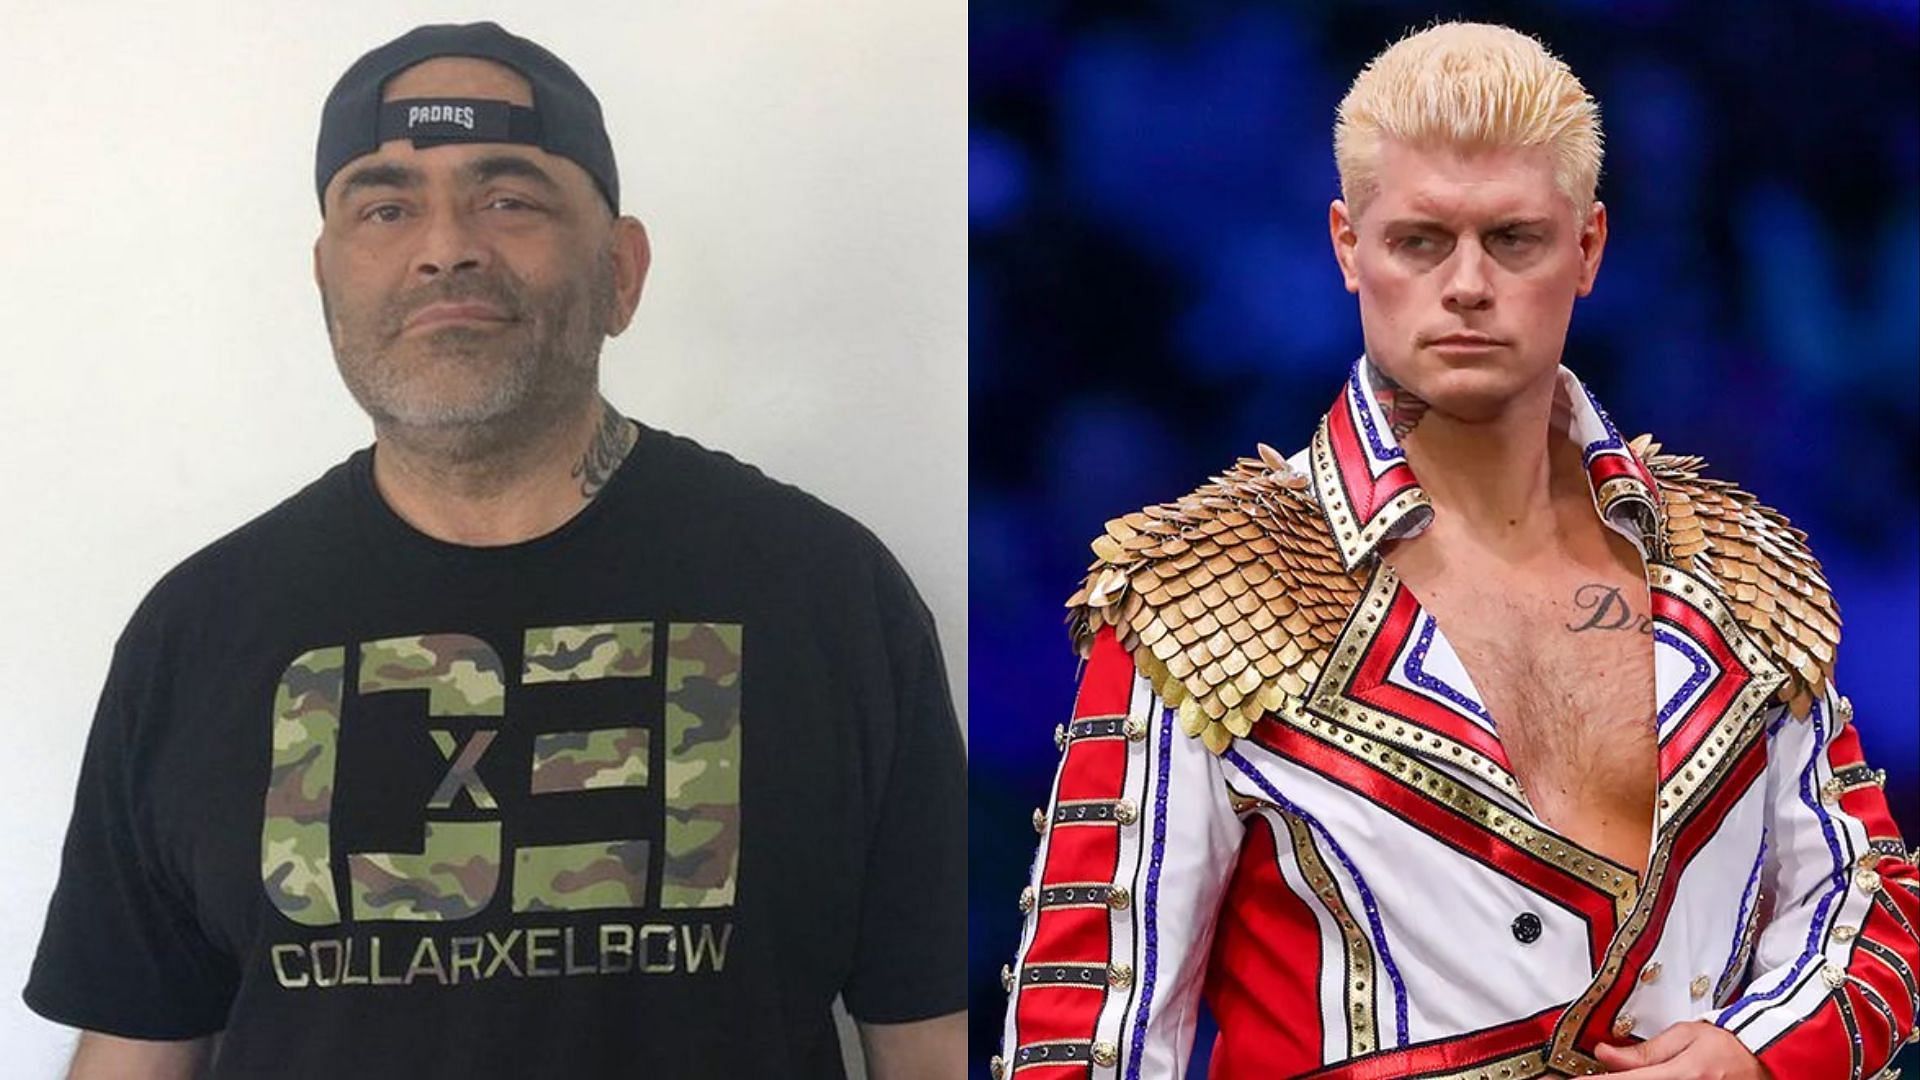 Konnan (left) and Cody Rhodes (right).